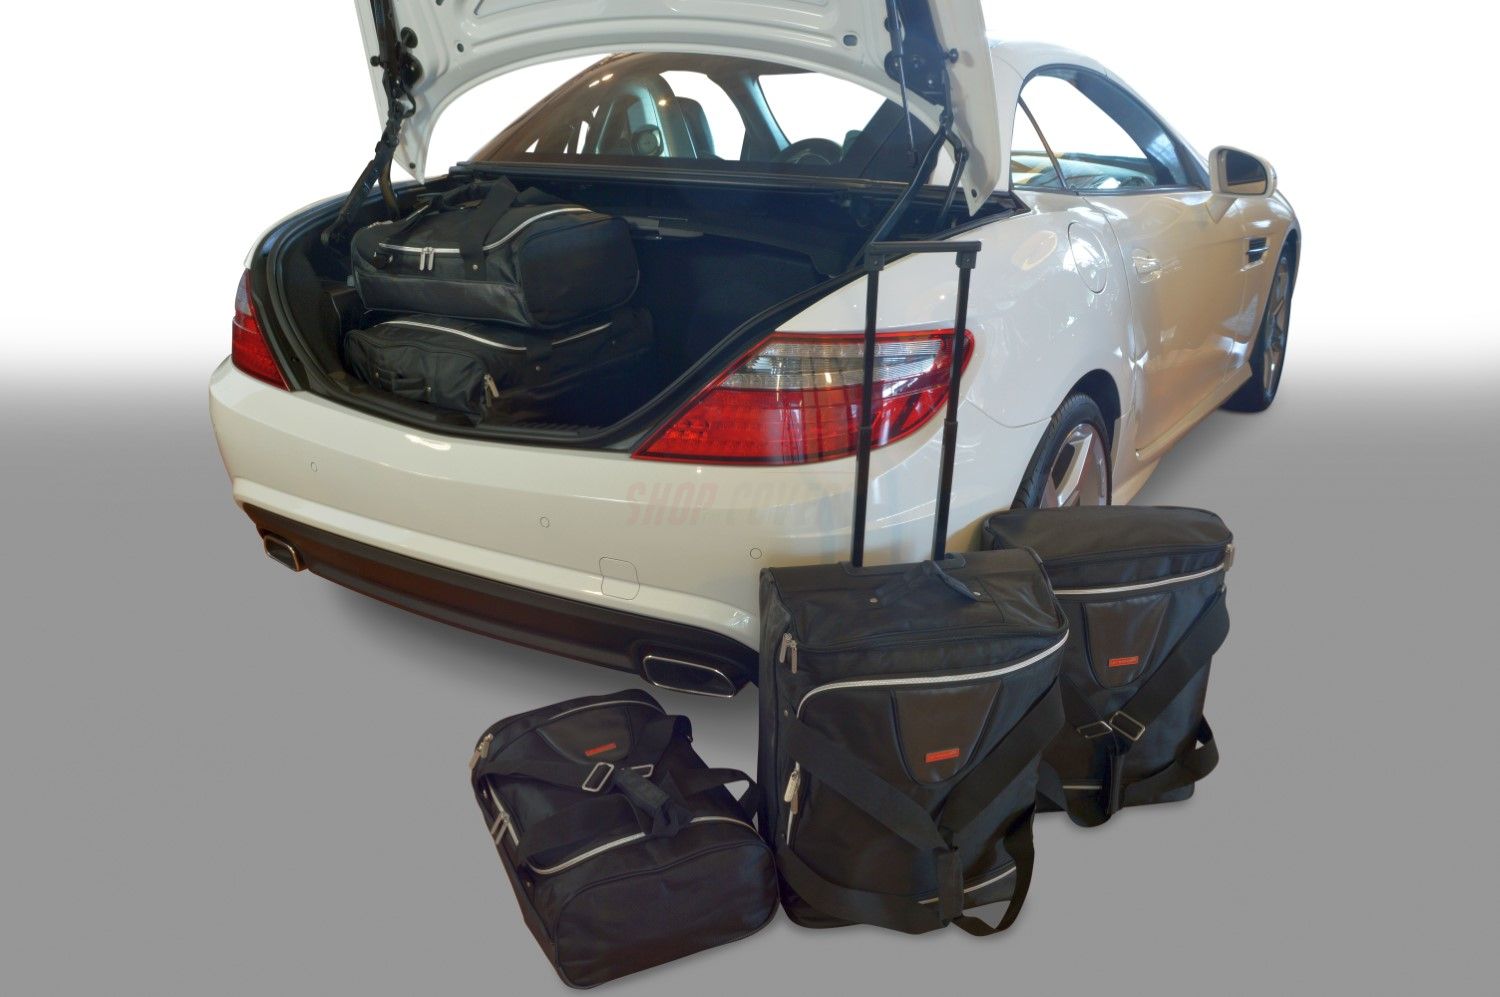 Travel bags fits Mercedes-Benz SLK (R171) tailor made (5 bags